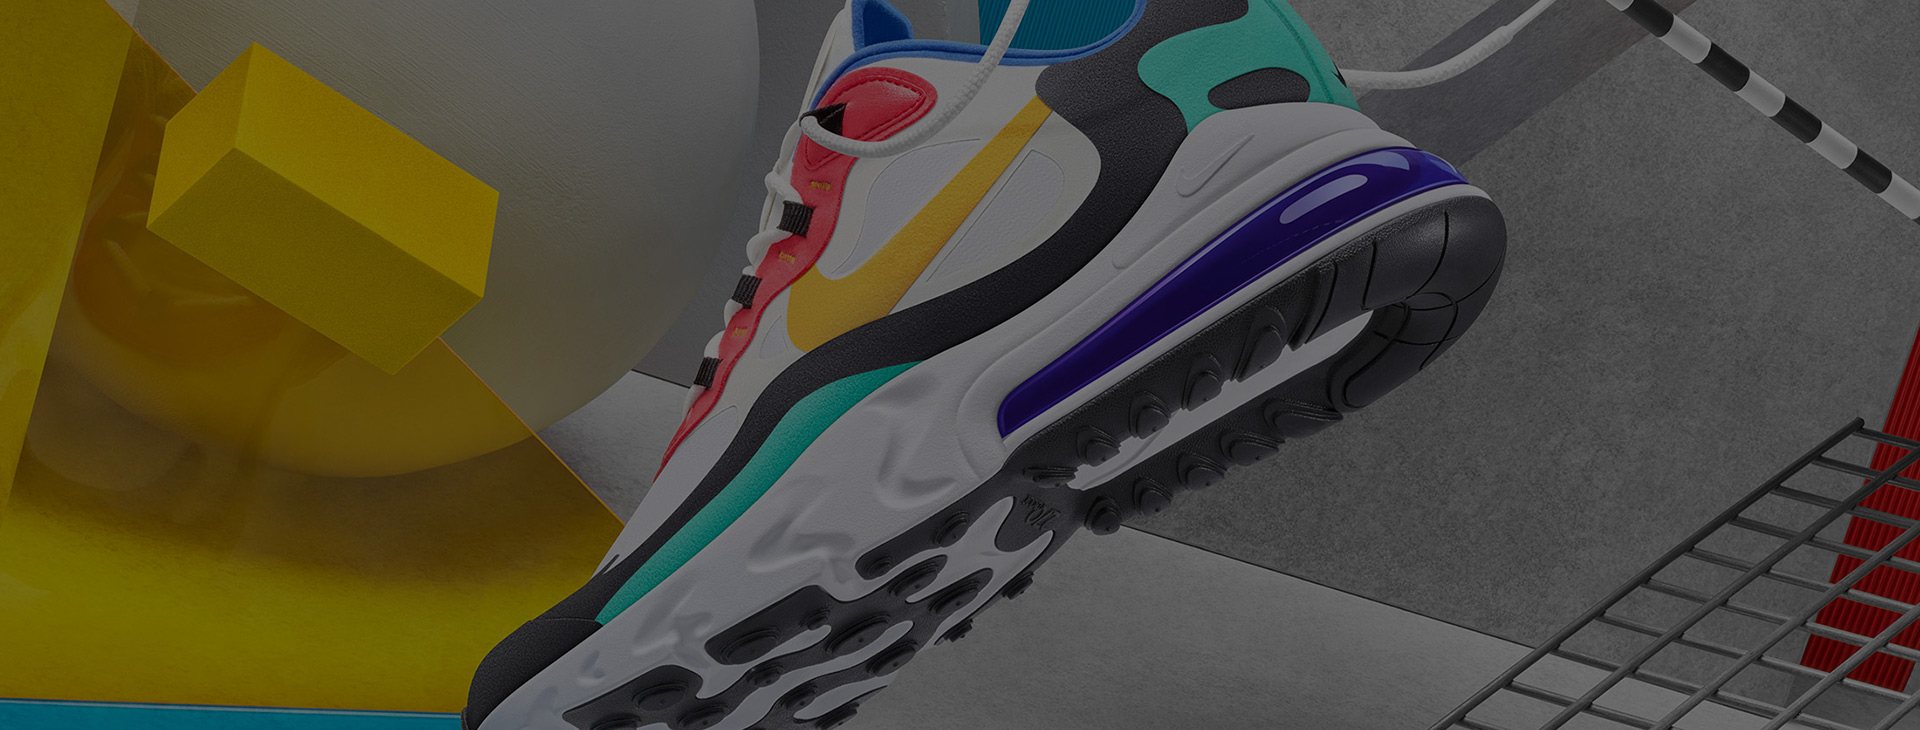 The Air Max 270 React Fuses Two Of Nike's Prized Platforms